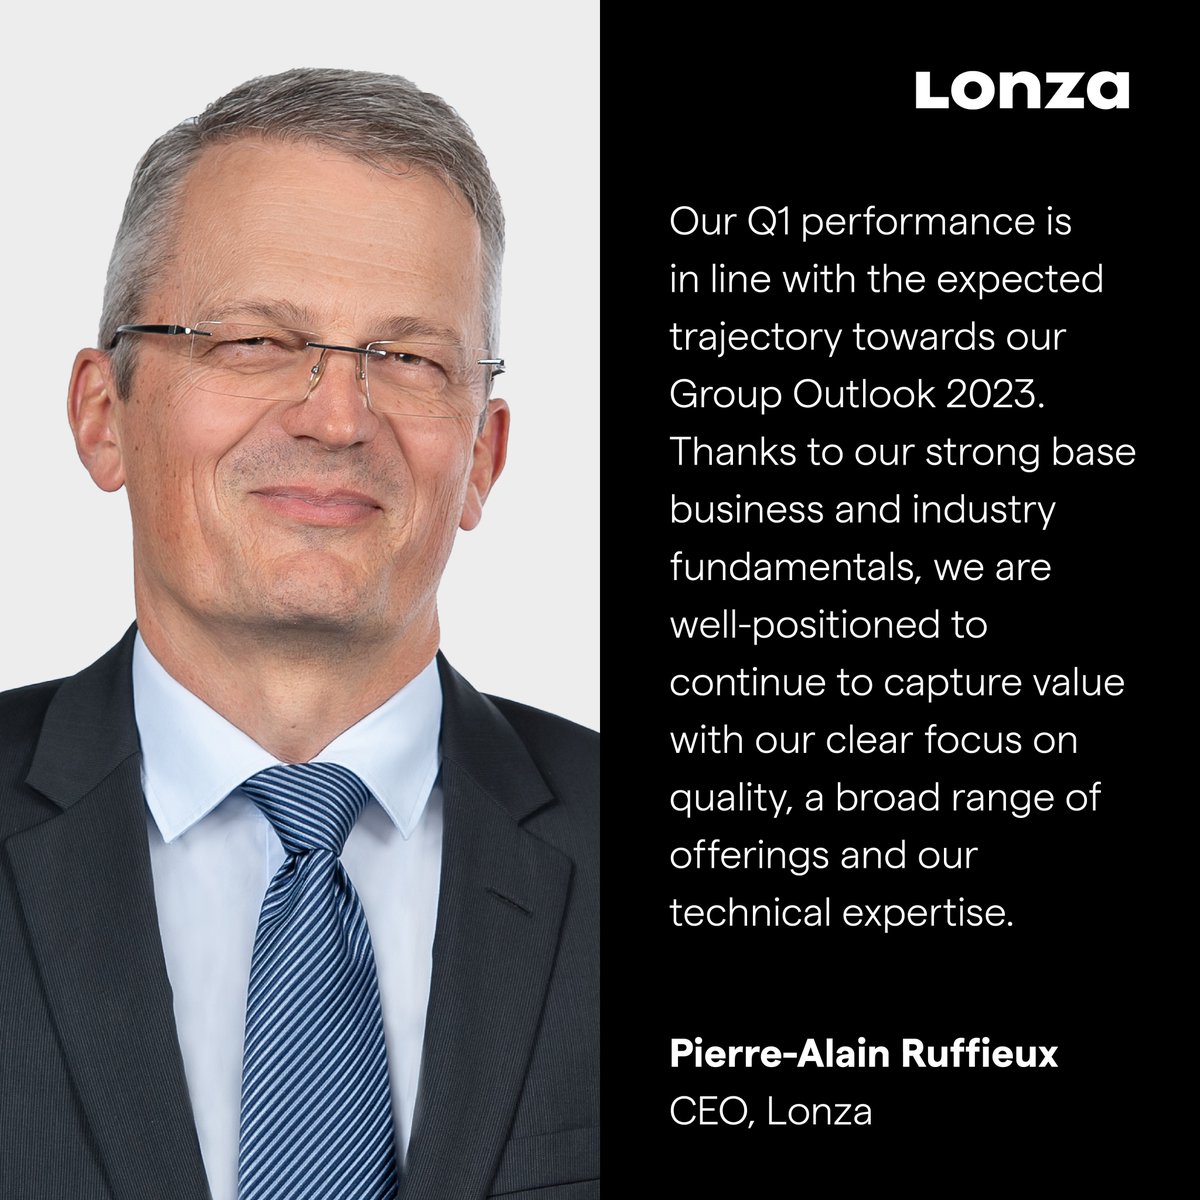 In our Q1 Qualitative Update, we reported performance in line with our 2023 Full-Year trajectory. Operations commenced in two new facilities in Visp (CH), while construction began at the facility in Stein (CH). Read more here: bit.ly/3HZi4pY